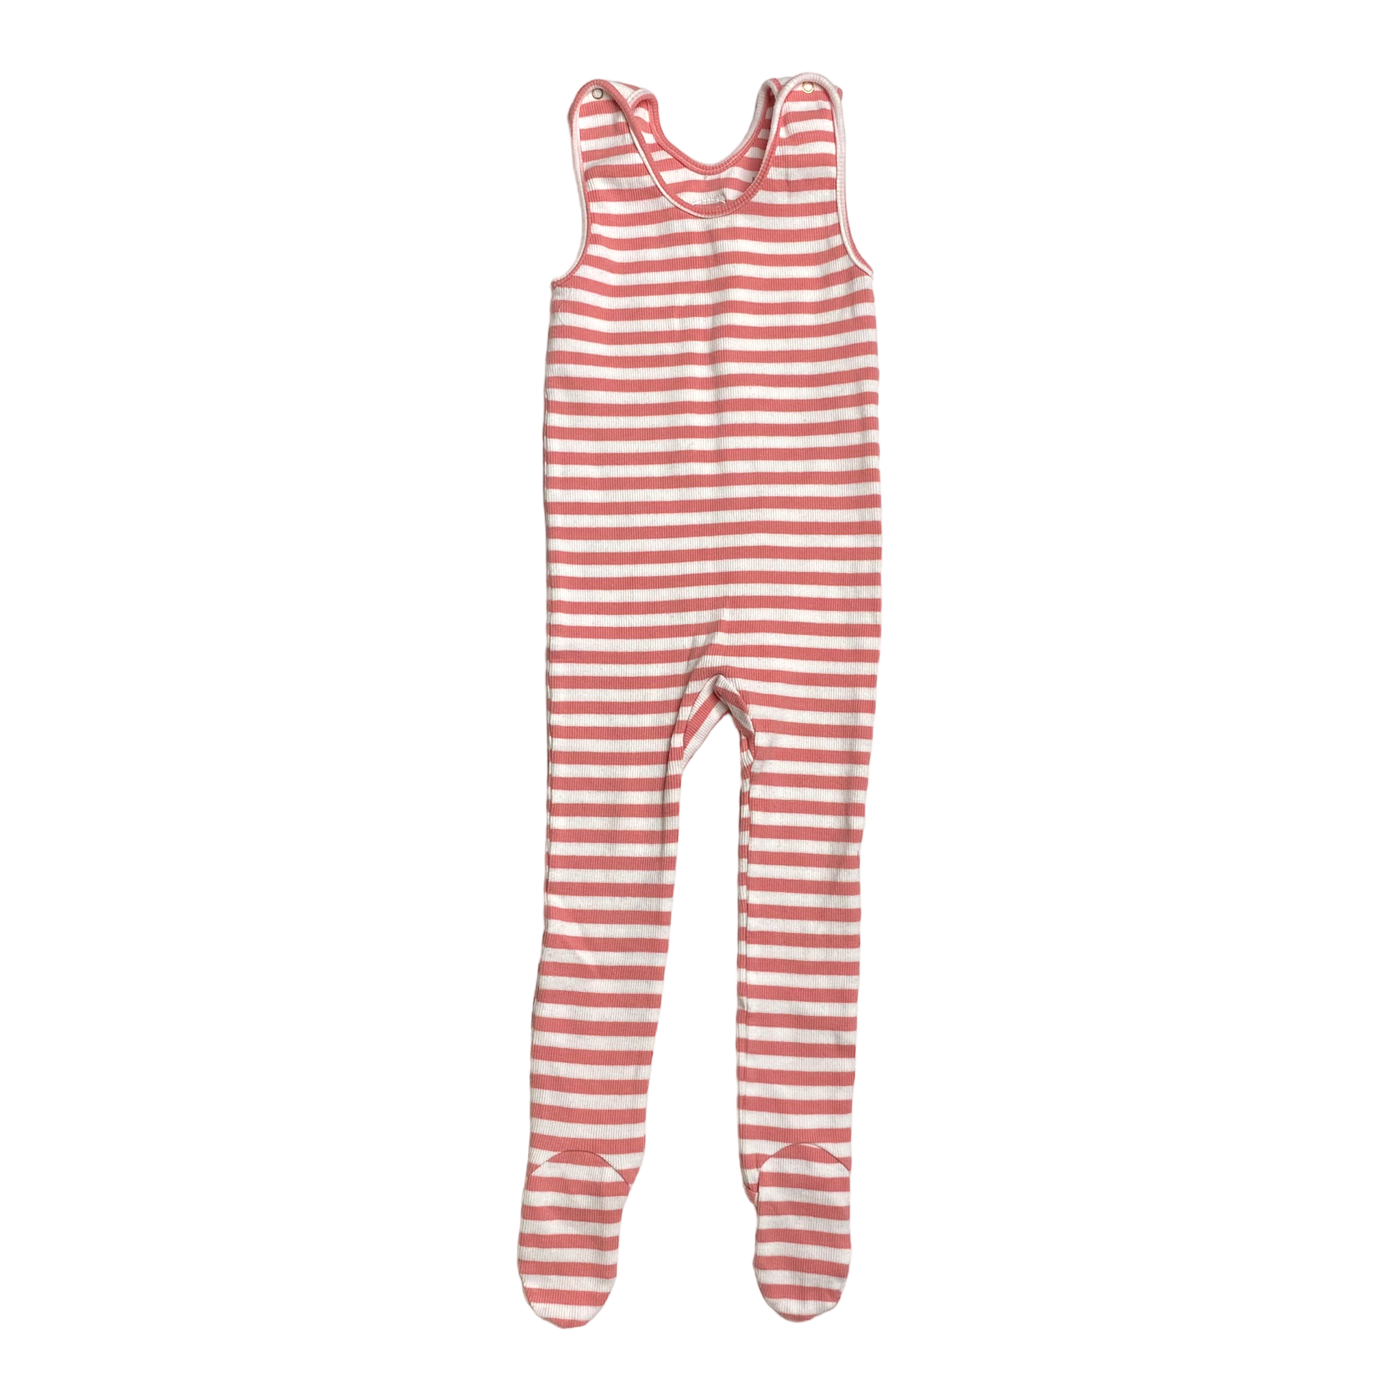 Metsola ribbed suit, pink | 74cm